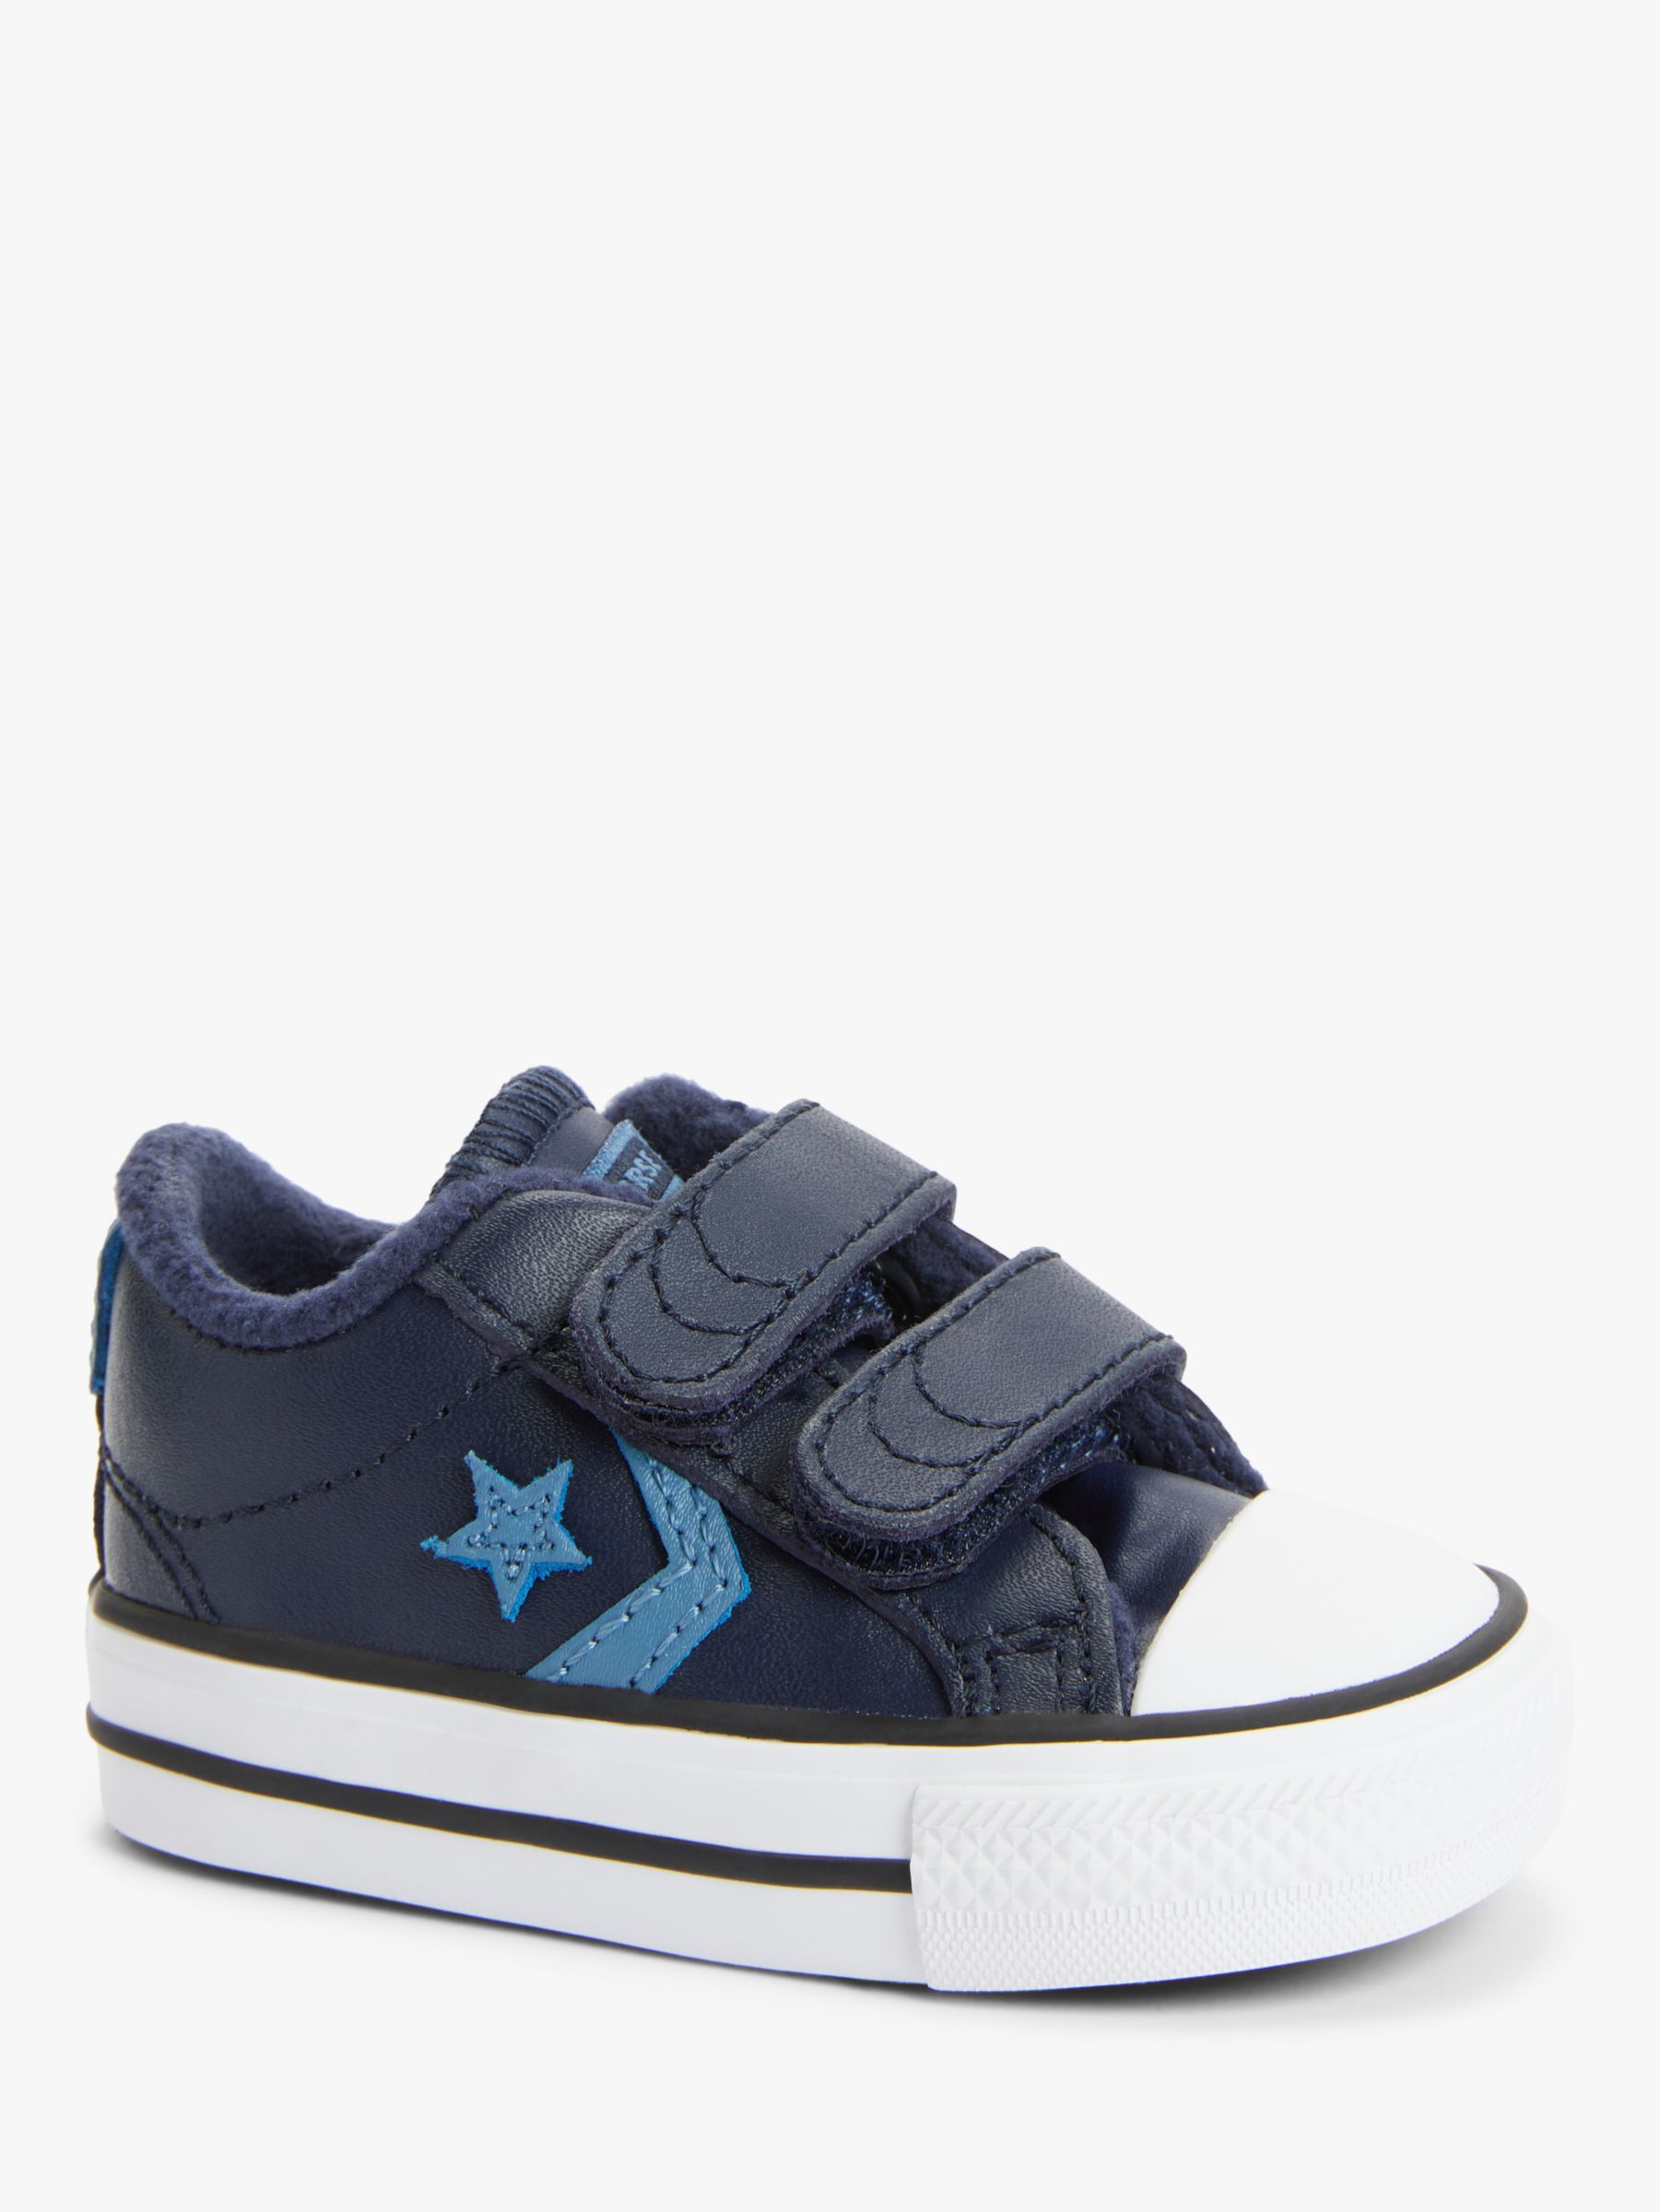 Converse Junior All Star 2V Leather Low-Top Riptape Trainers, Obsidian ...